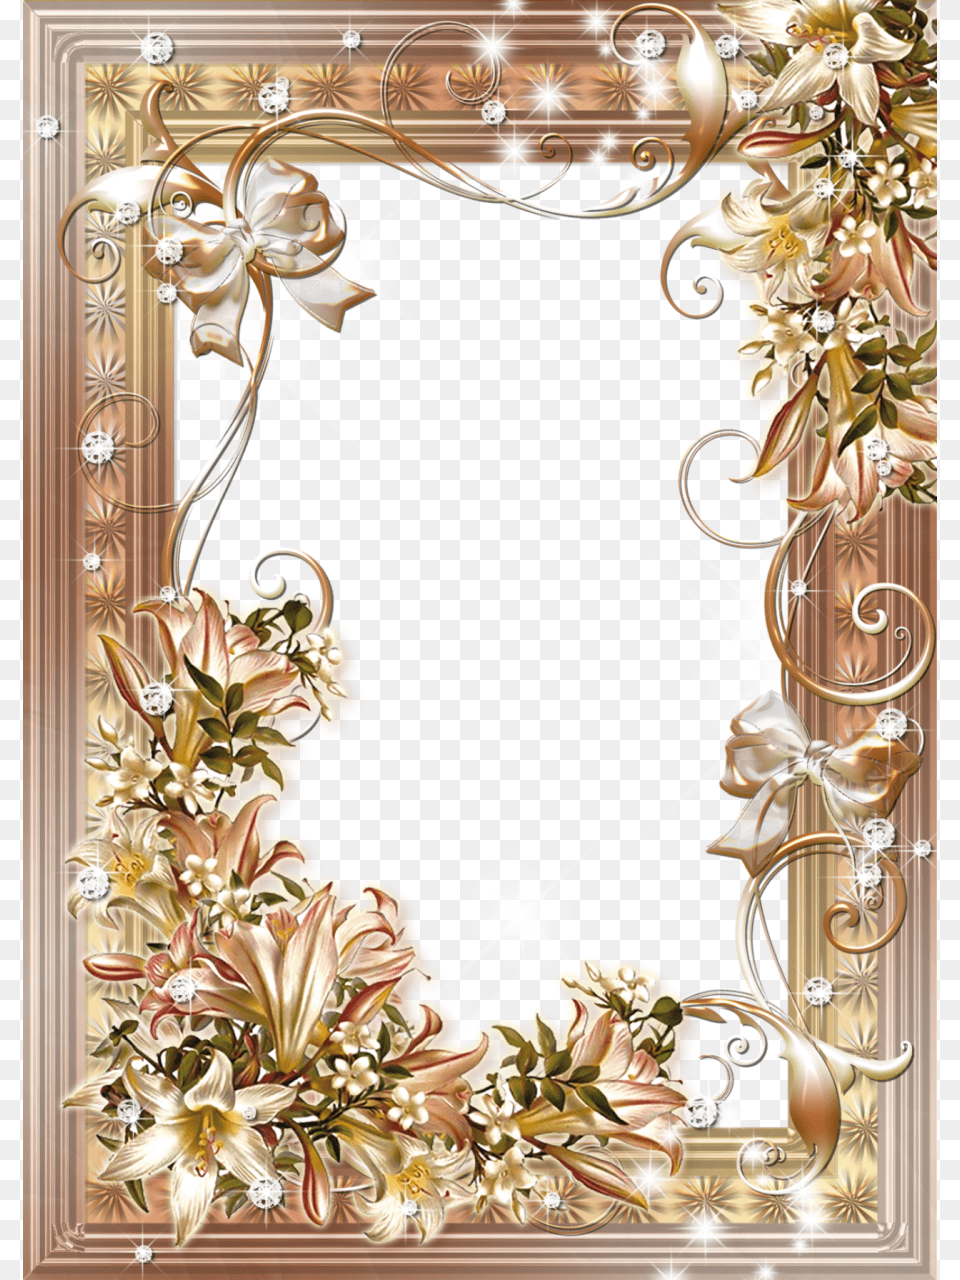 Flower Photo Frame With Lilies Bouquets Mylittlething4u Lace Watch Flower Watch Beige Watch, Art, Floral Design, Graphics, Pattern Png